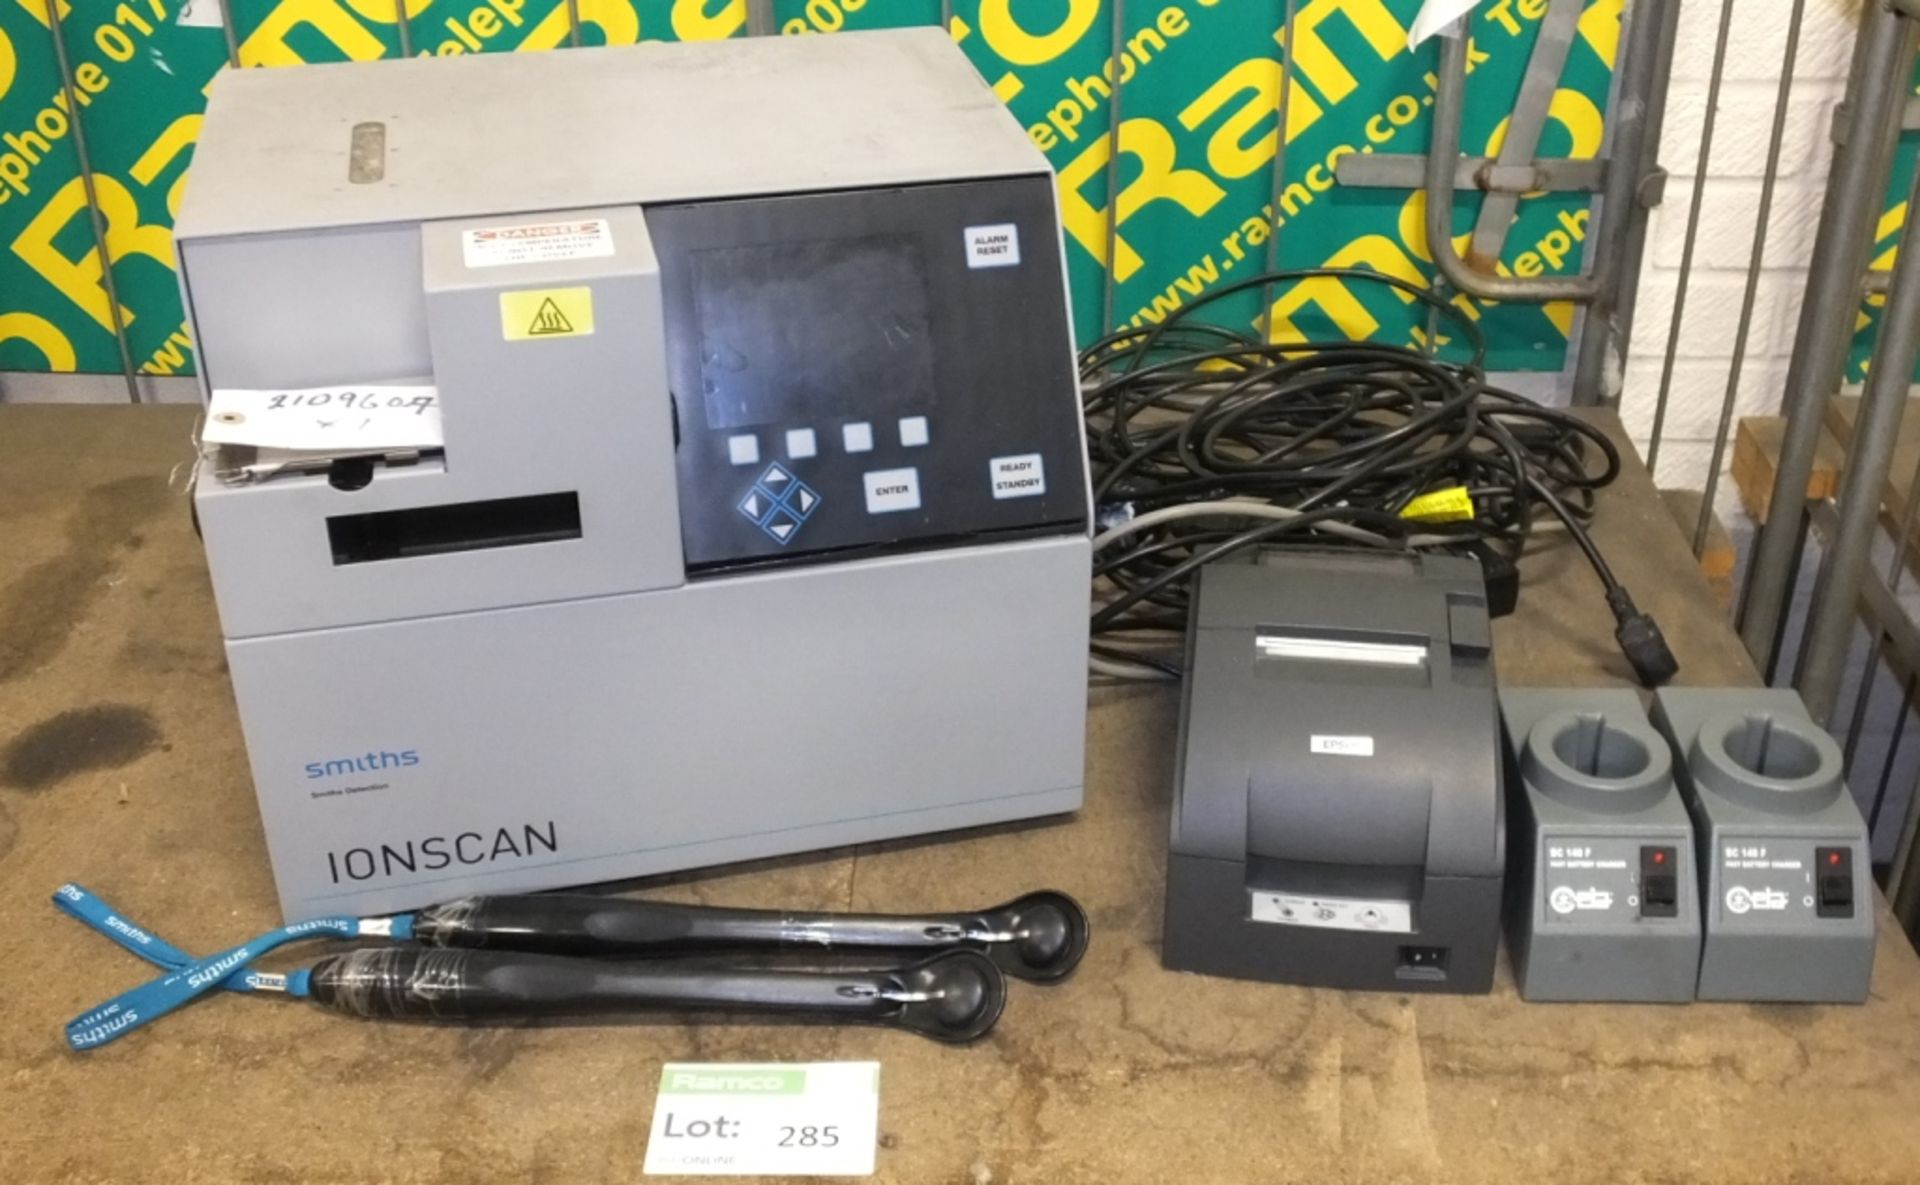 Smiths IONSCAN Detection system, Epson printer, 2x Fast Battery chargers BC 140F